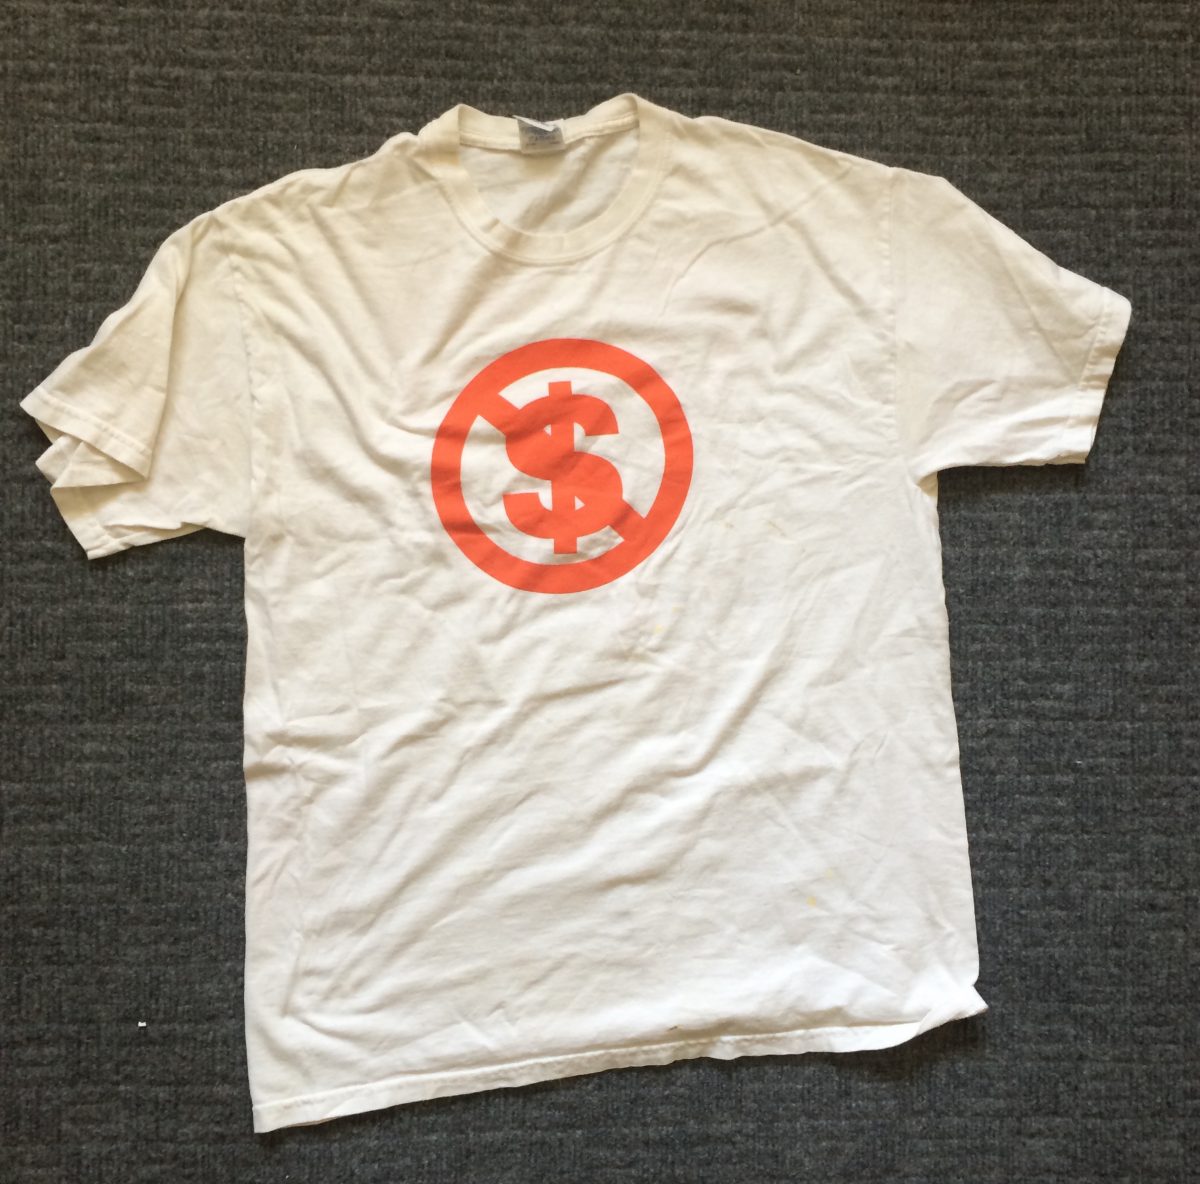 T-shirt with cross out dollar sign